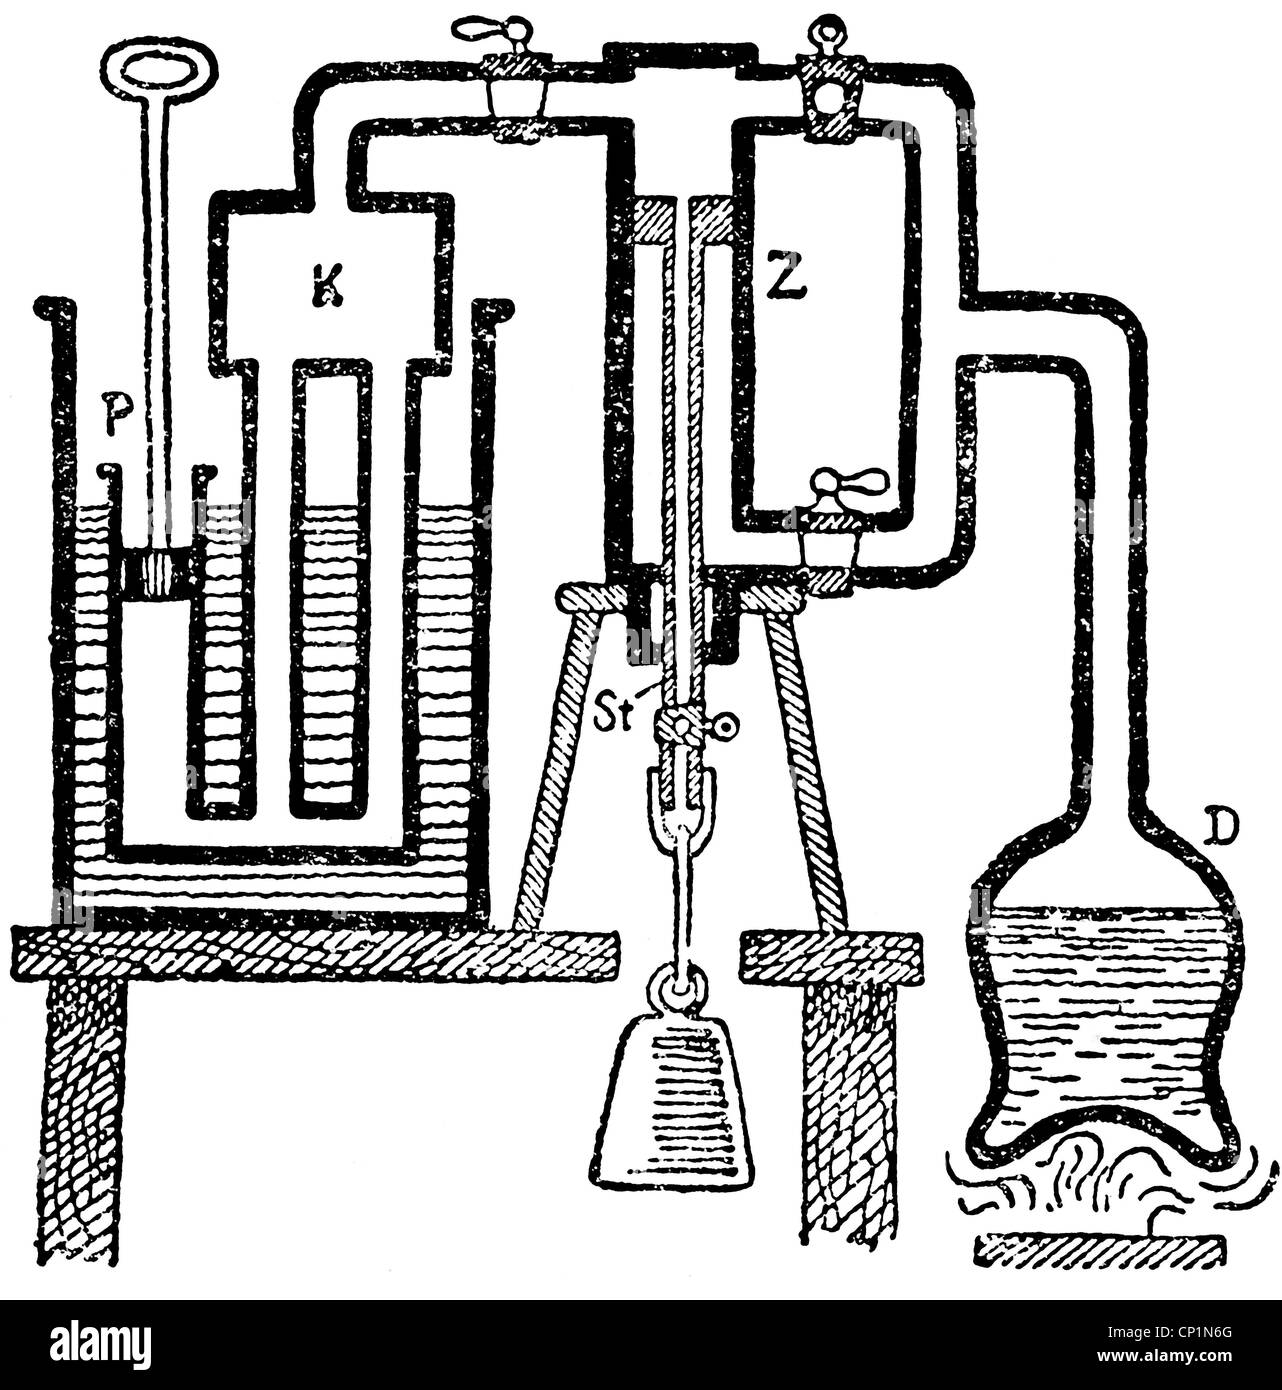 Watt, James, 19.1.1736 - 25.8.1819, Scottish engineer and inventor, model of a steam engine with seperate condensator, diagram, wood engraving, 19th century, Stock Photo